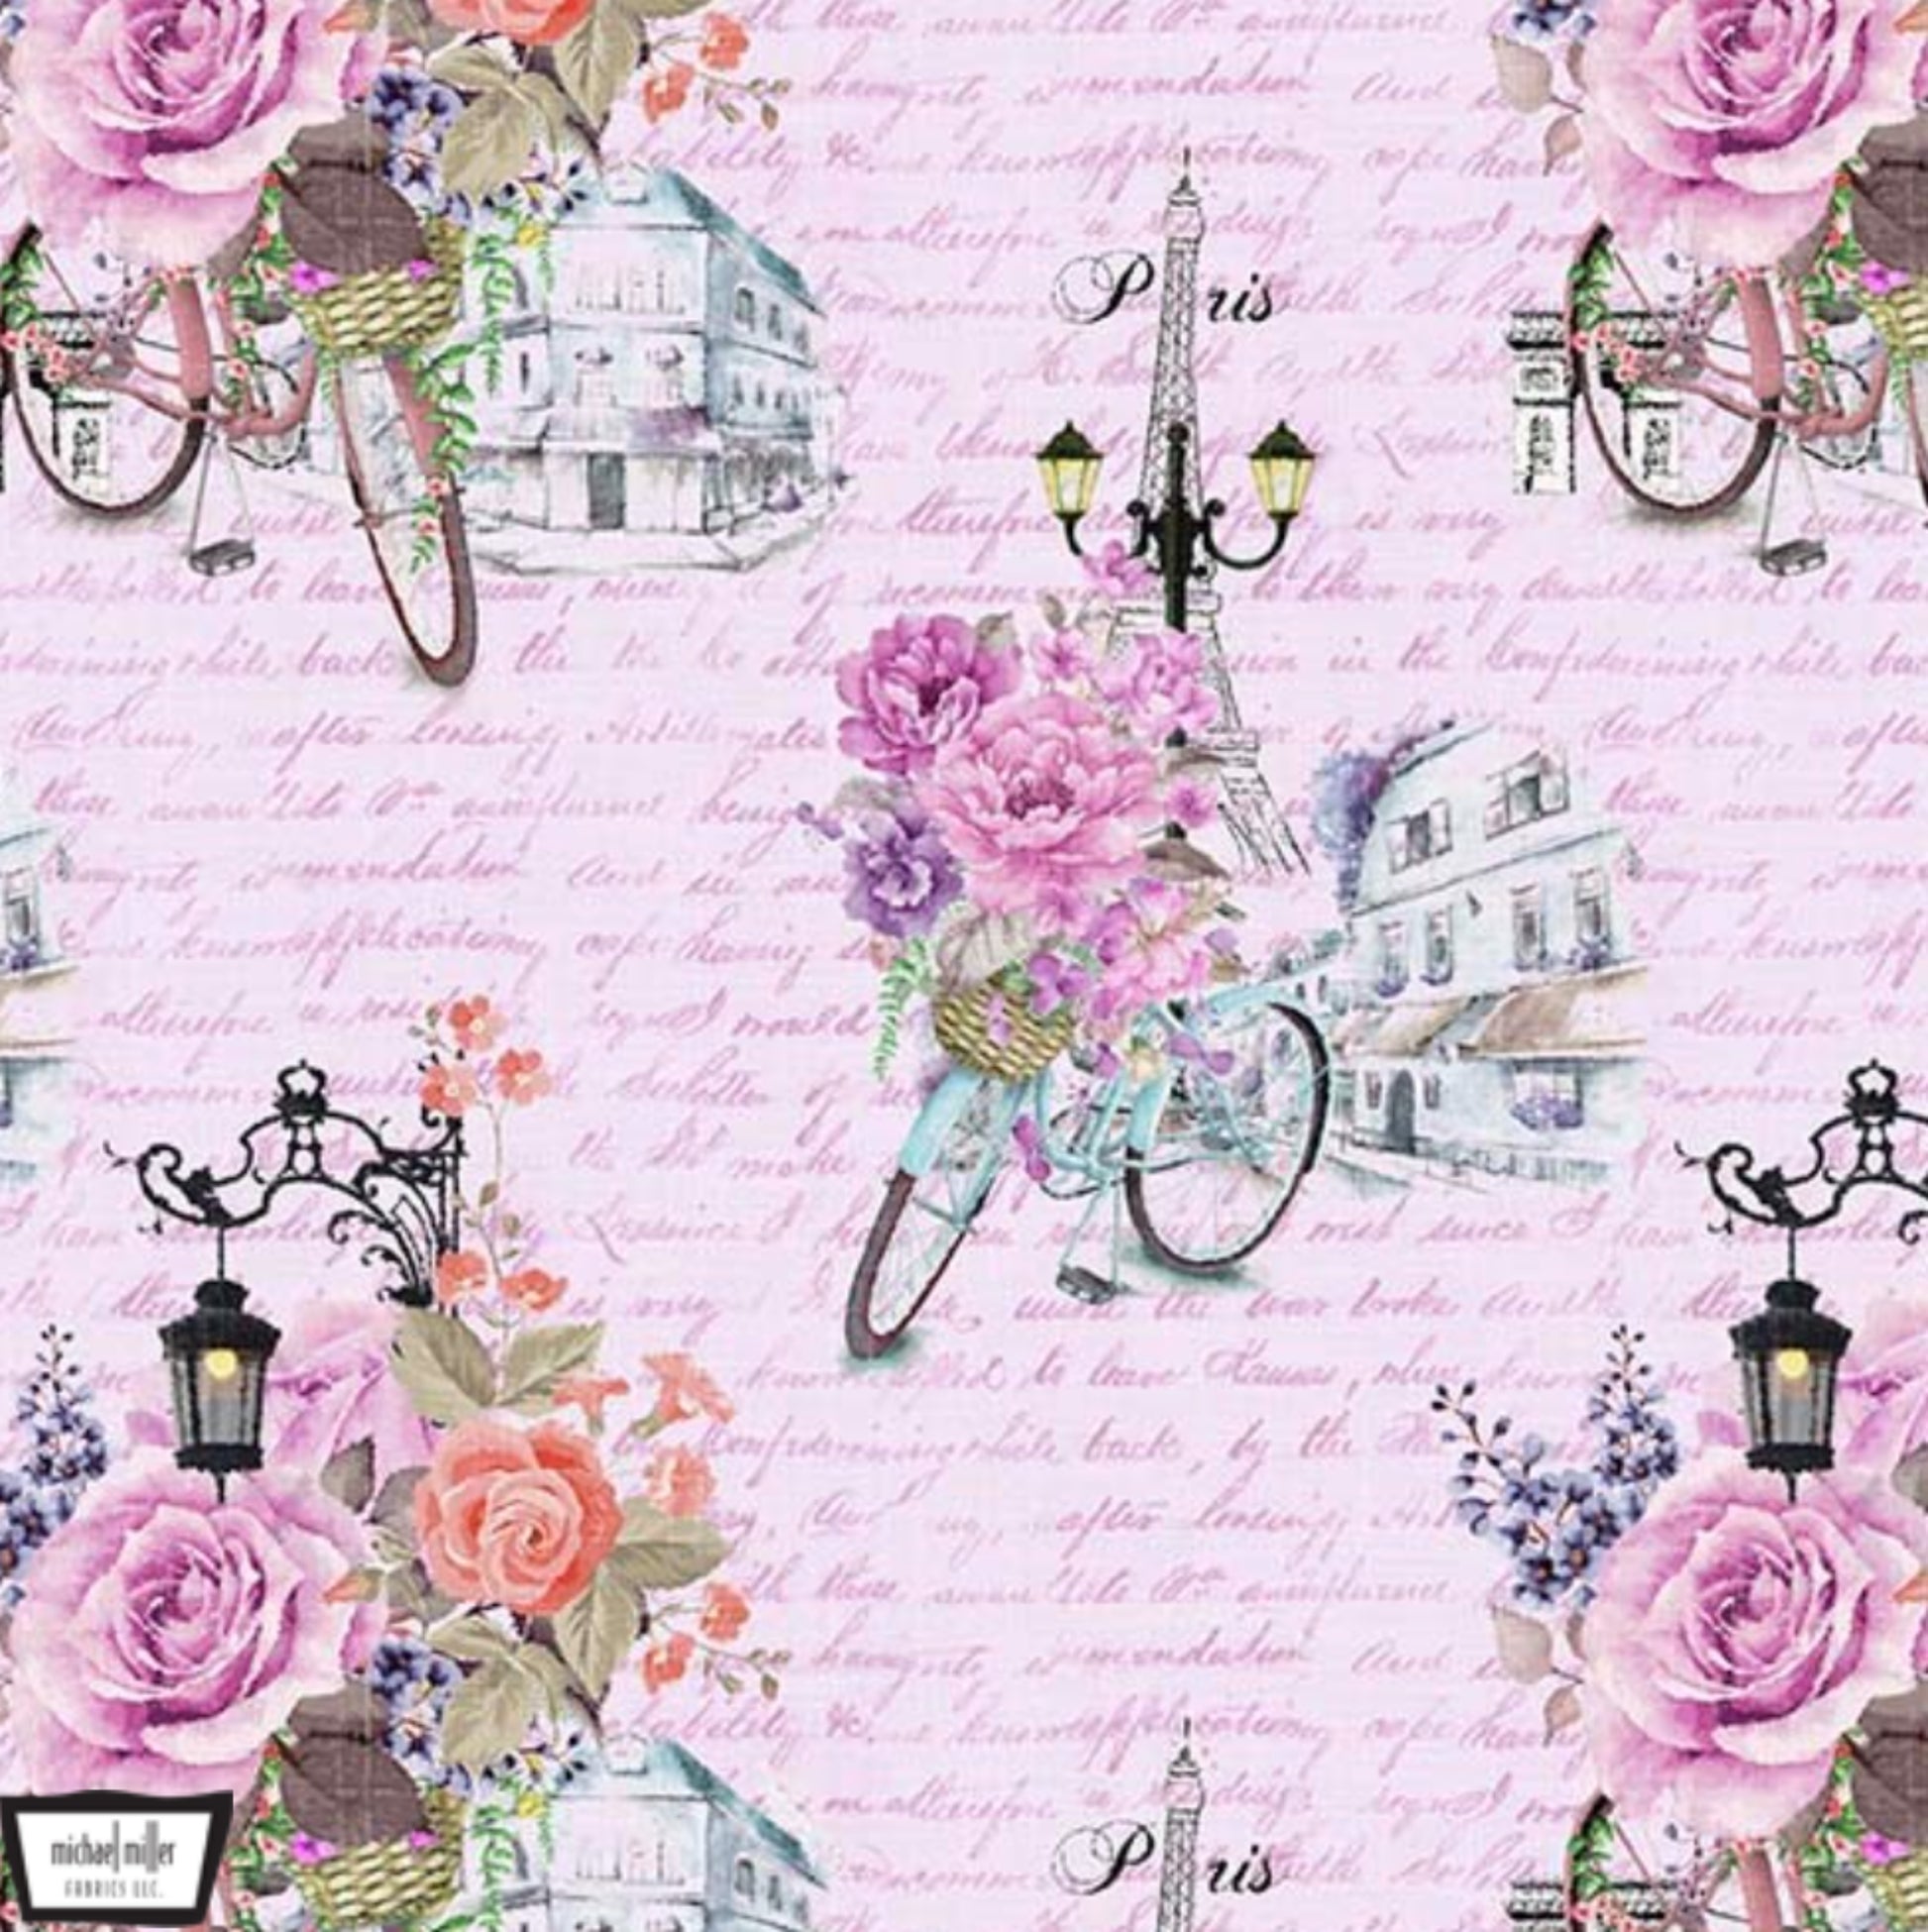 Boulevard St. Germain Fabric from the We'll Always Have Paris Collection from Michael Miller Fabrics